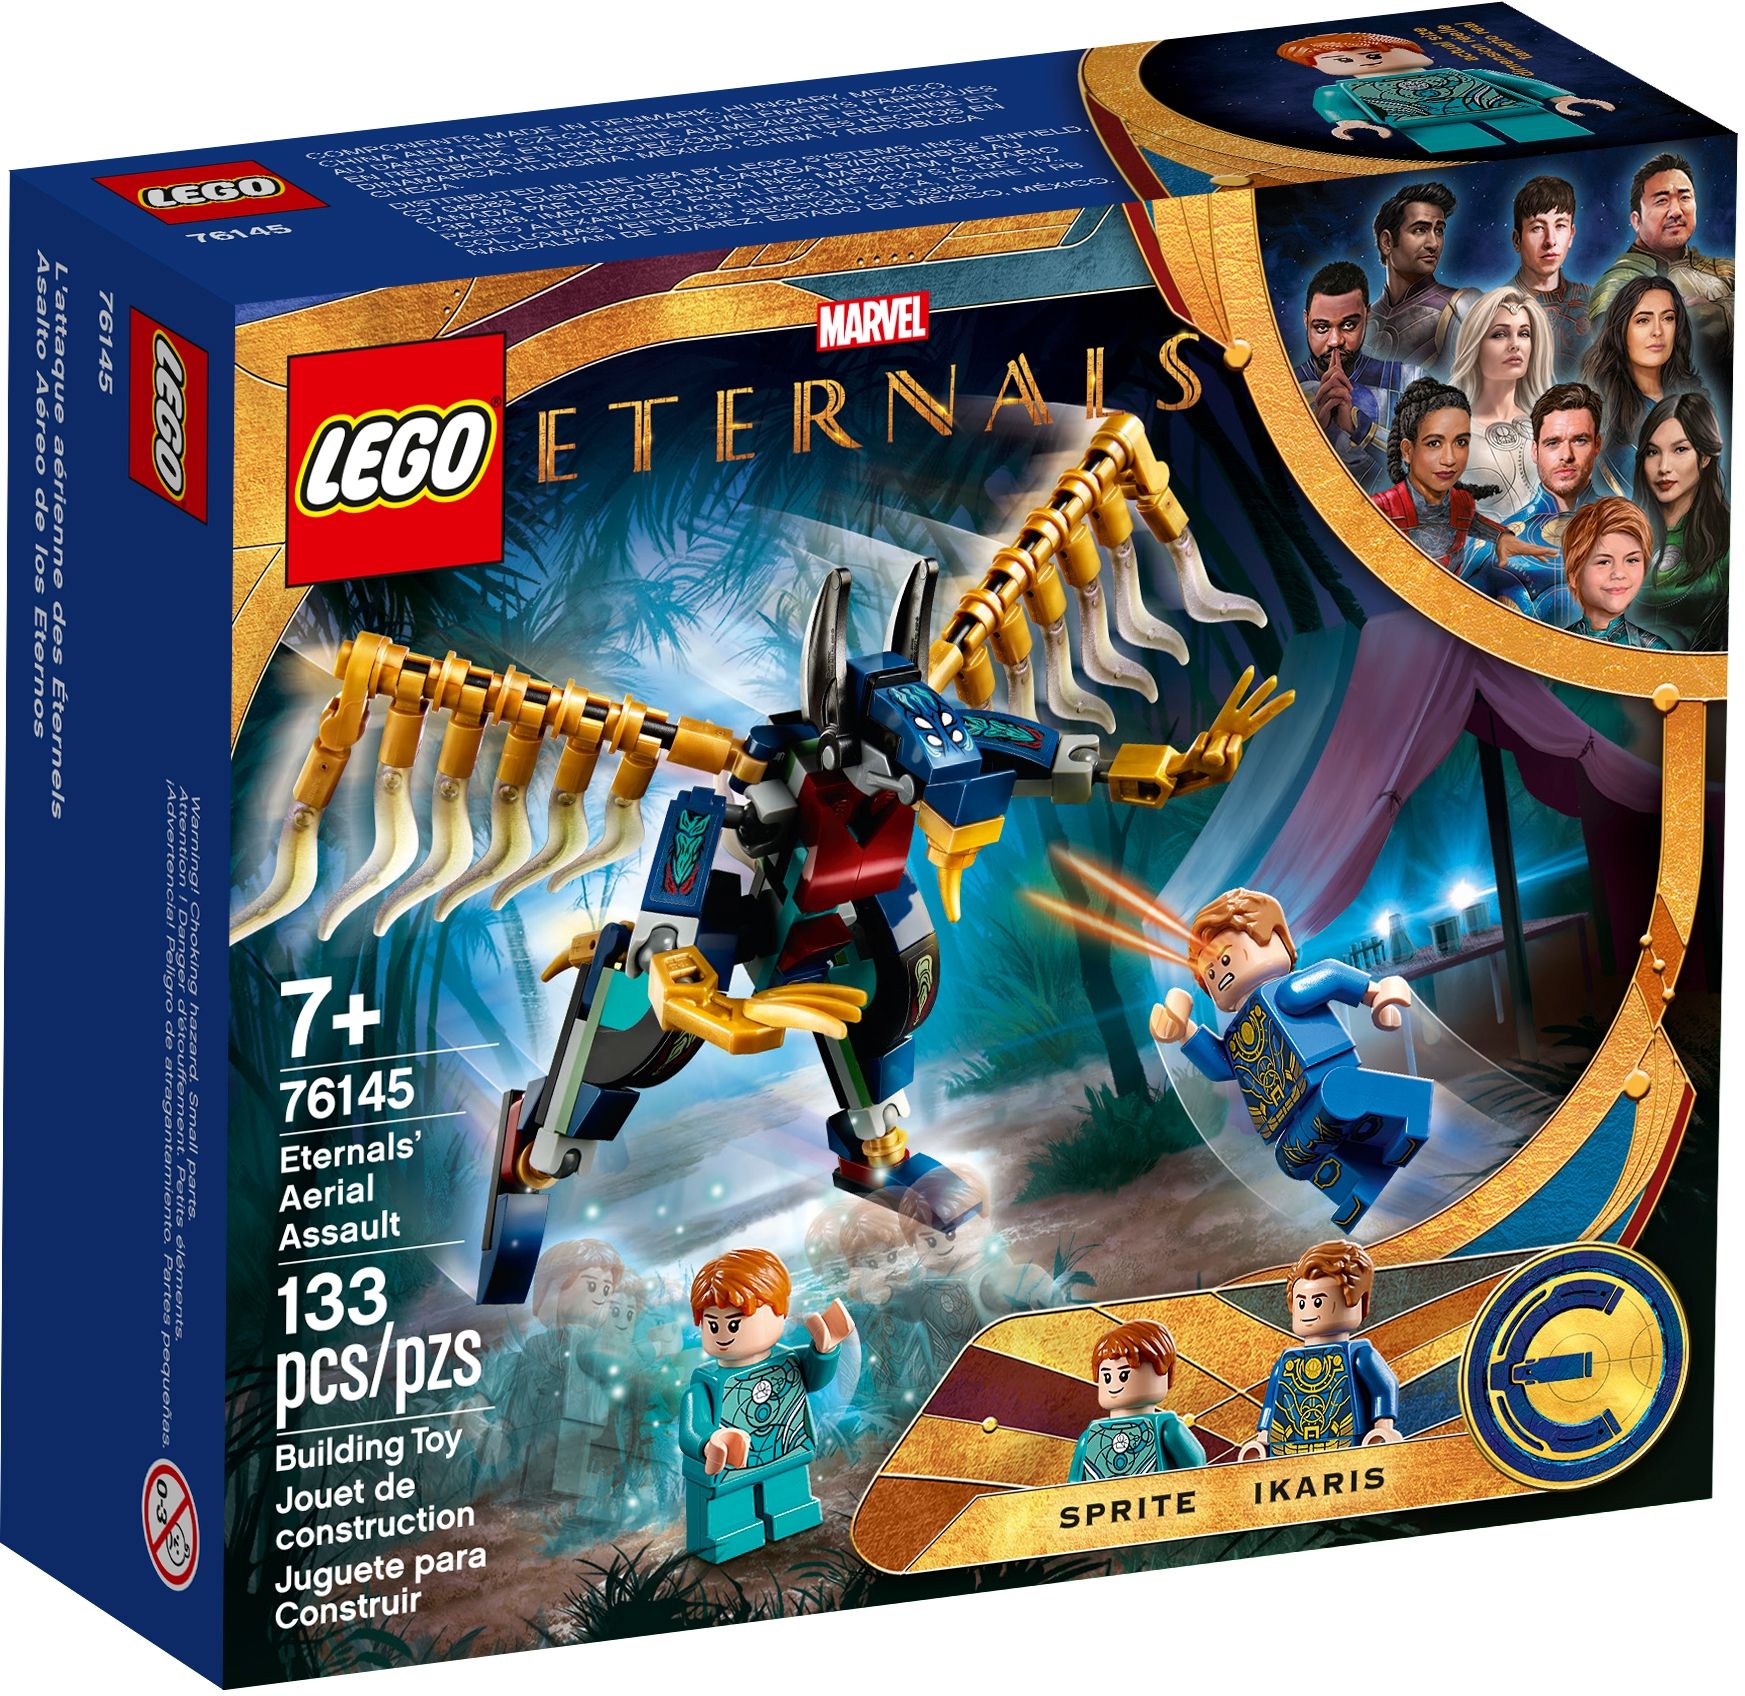 To Get All of LEGOs Eternals Minifigures You Need to Buy Four Different Sets